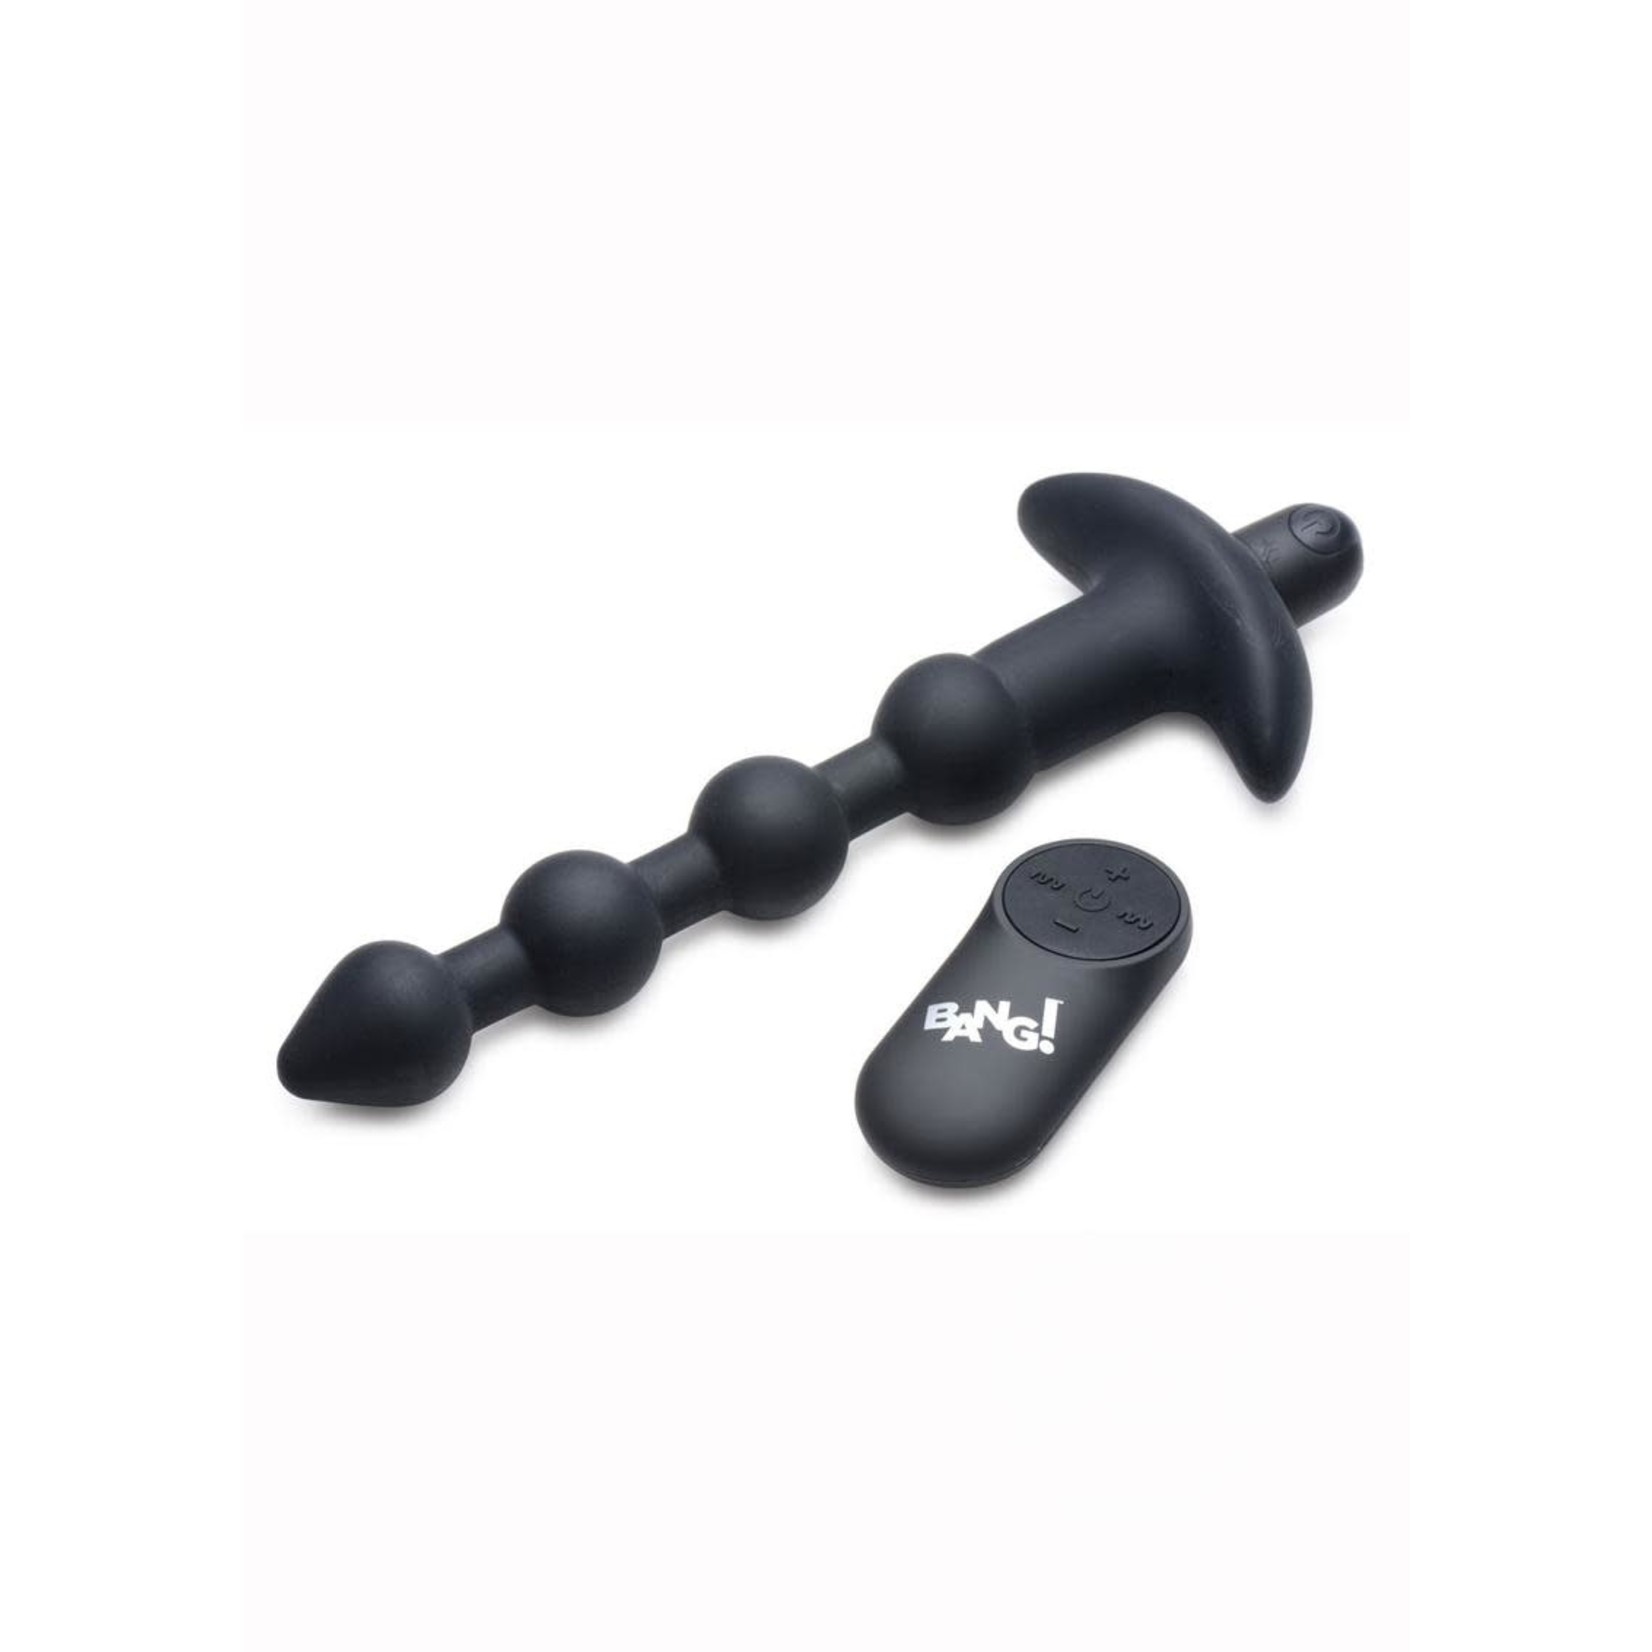 Bang! Vibrating Silicone Rechargeable Anal Beads With Remote Control - Black